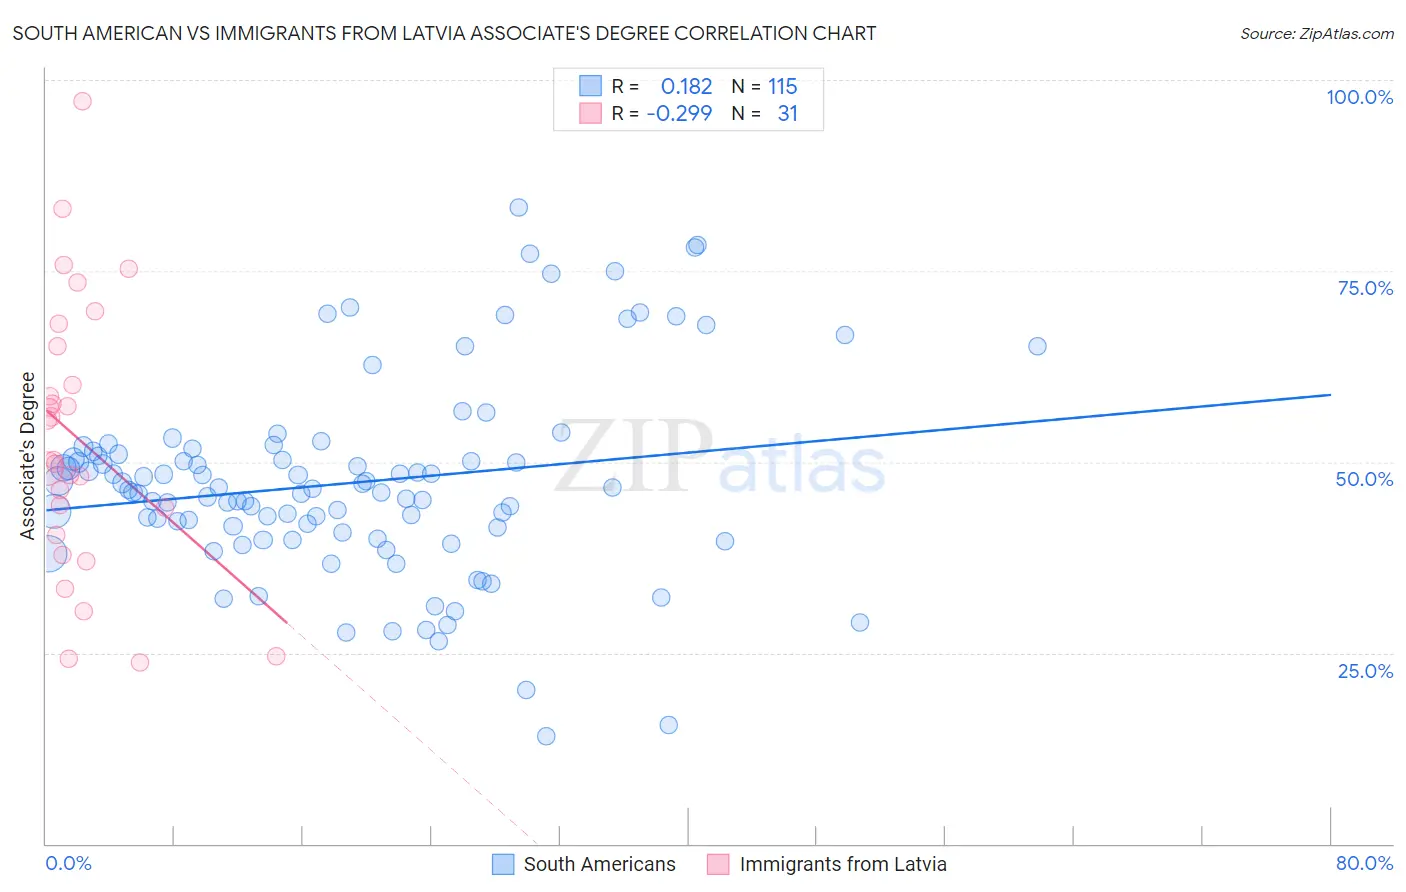 South American vs Immigrants from Latvia Associate's Degree